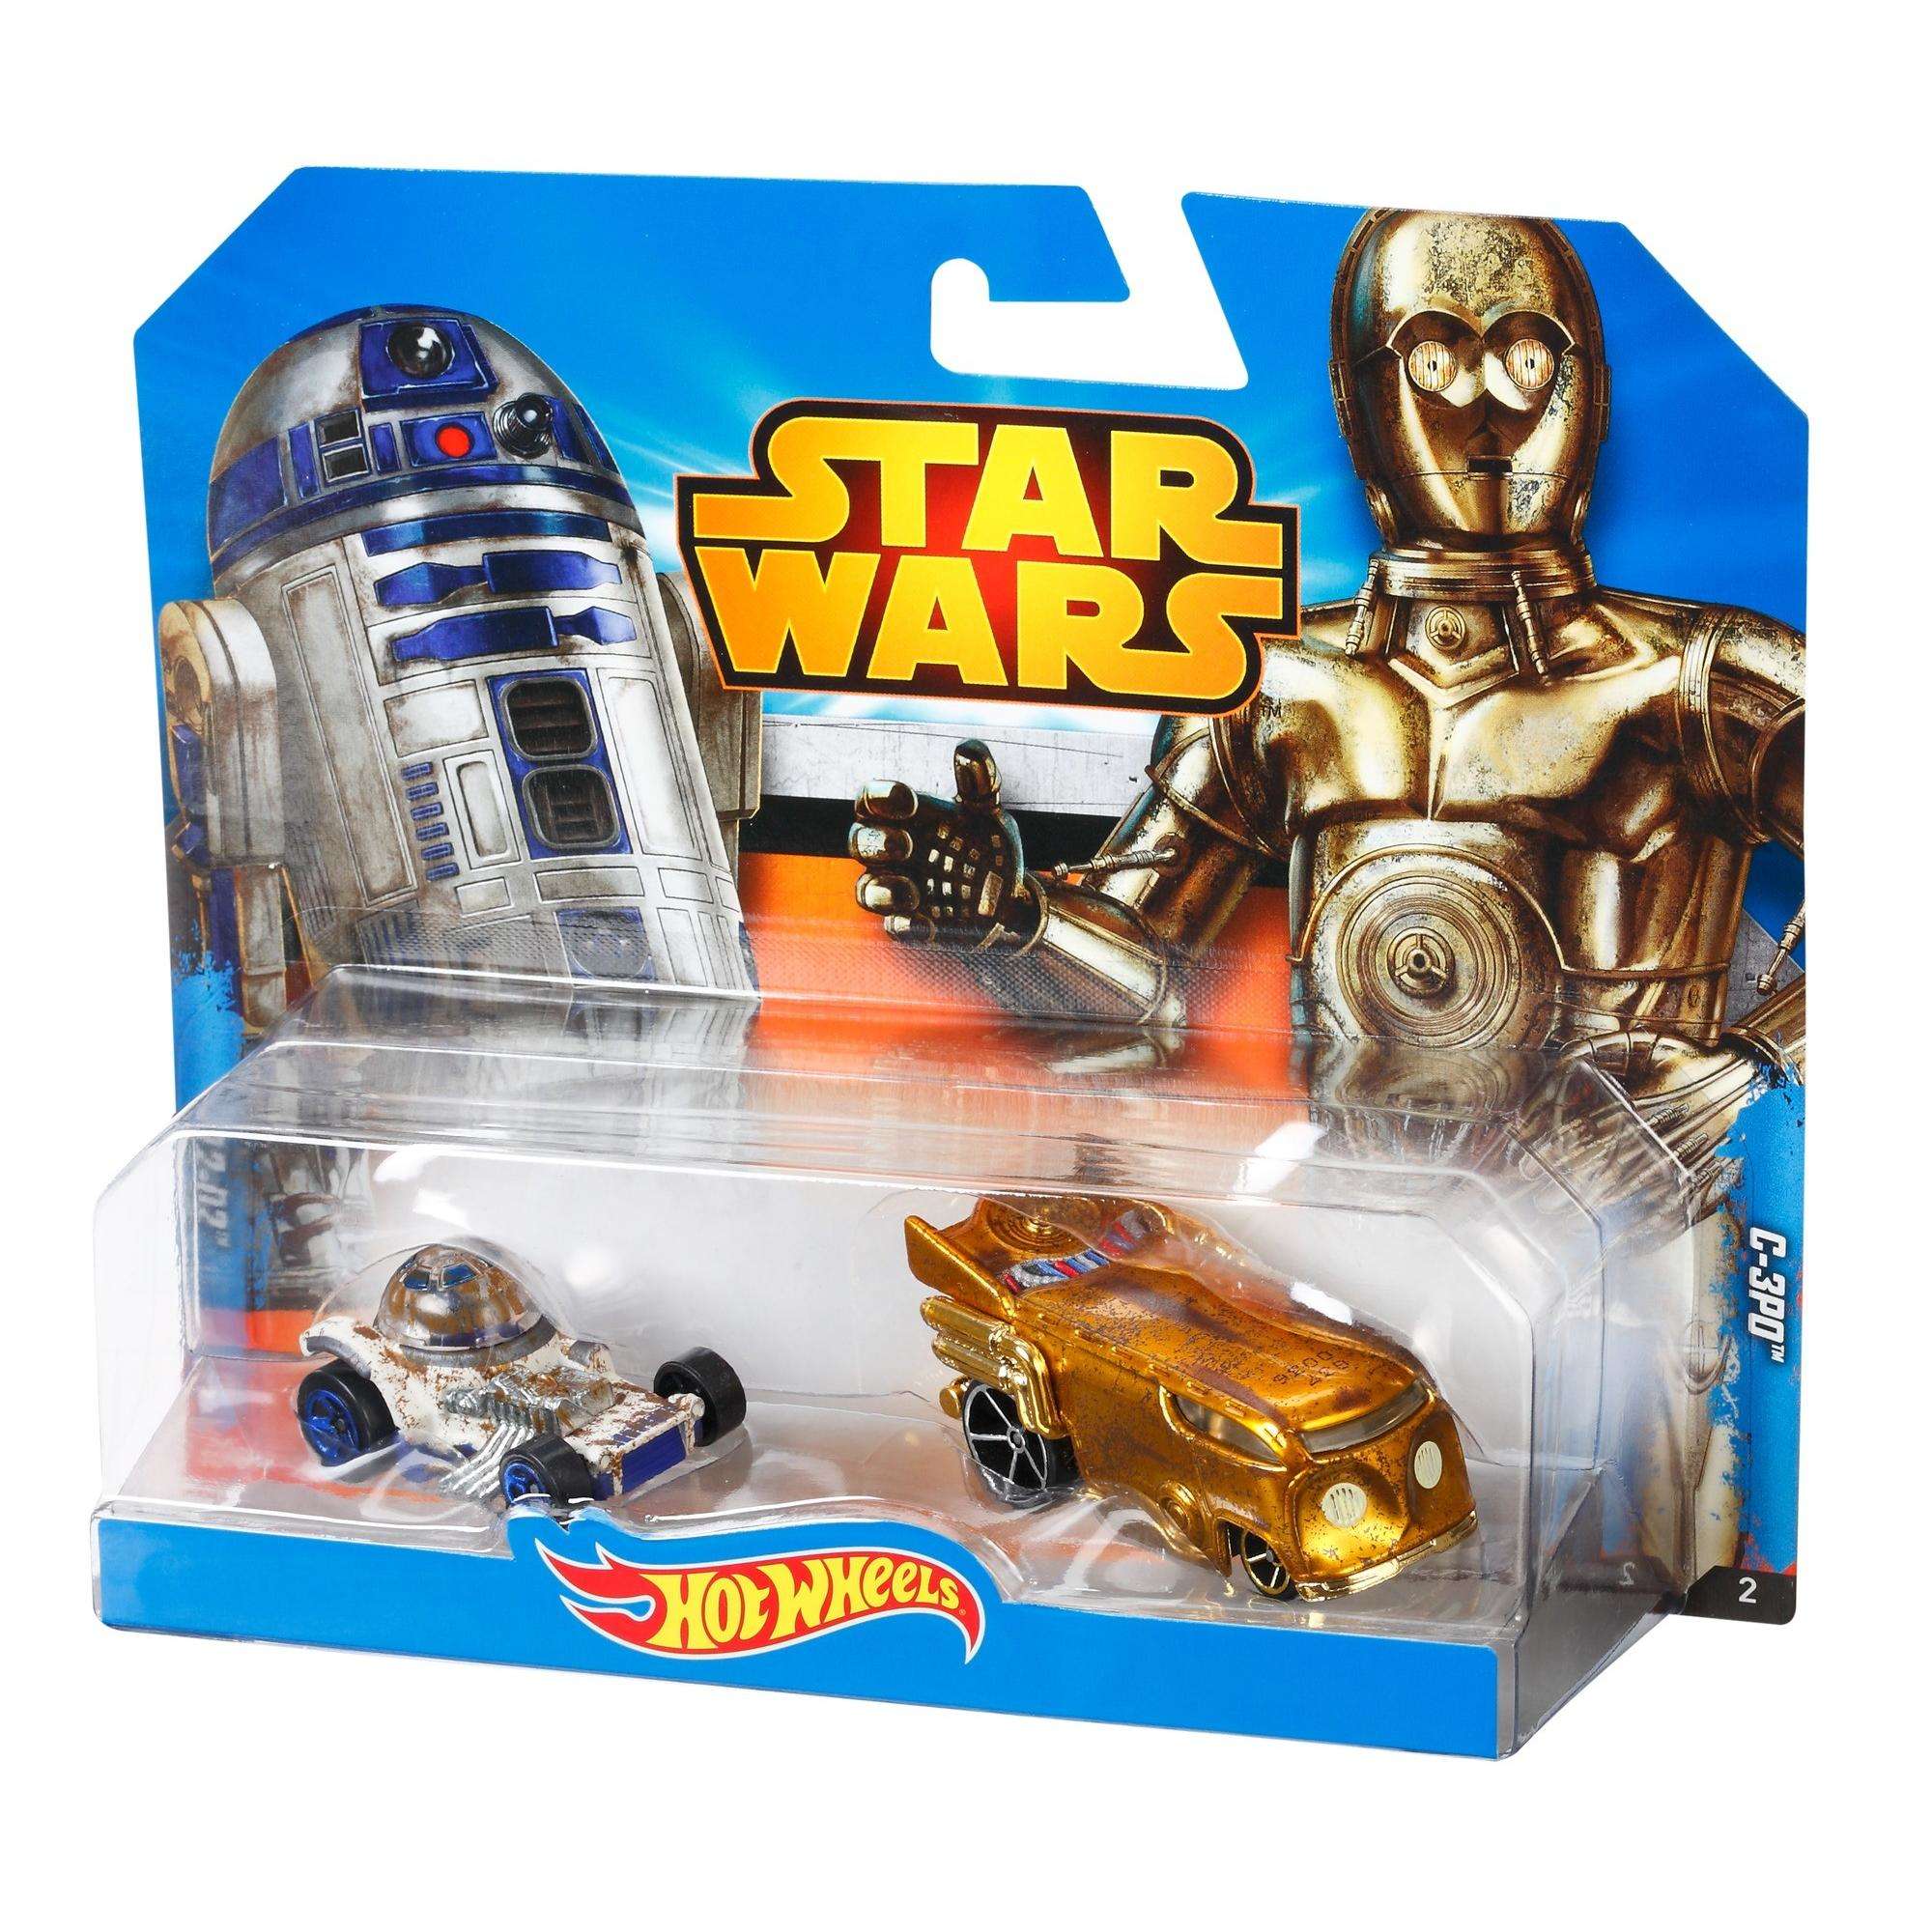 Star Wars Hot Wheels C-3PO & R2-D2 Character Vehicles (2014) Mattel Toy Car 2-Pack - image 5 of 5